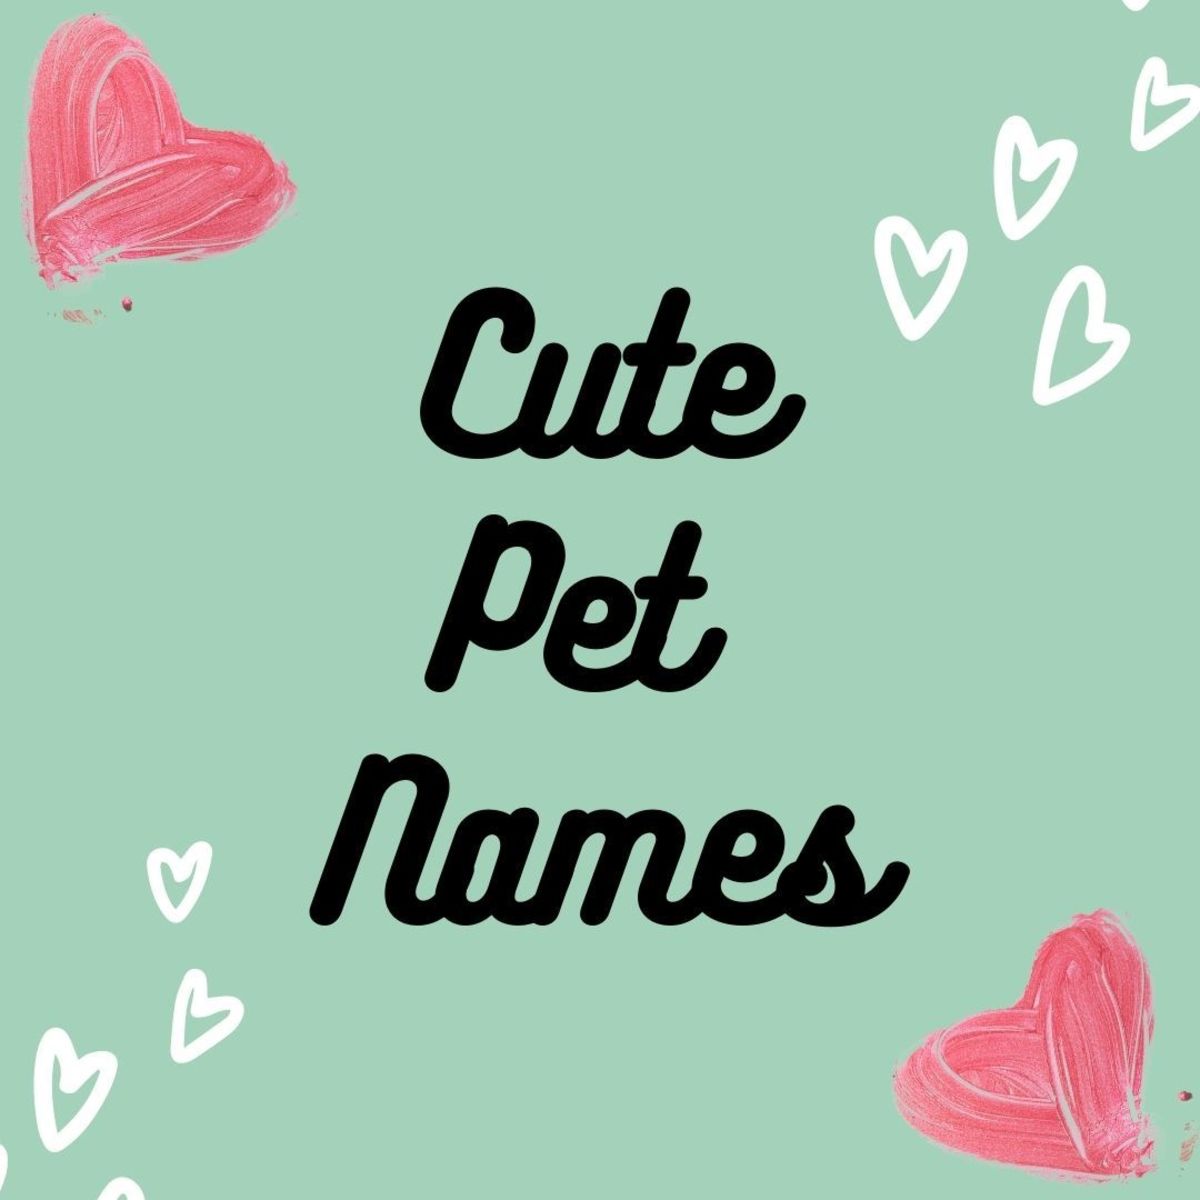 Cute Couple Endearments / This Is The Most Popular Couple Pet Name In Utah Deseret News : Cutie ...